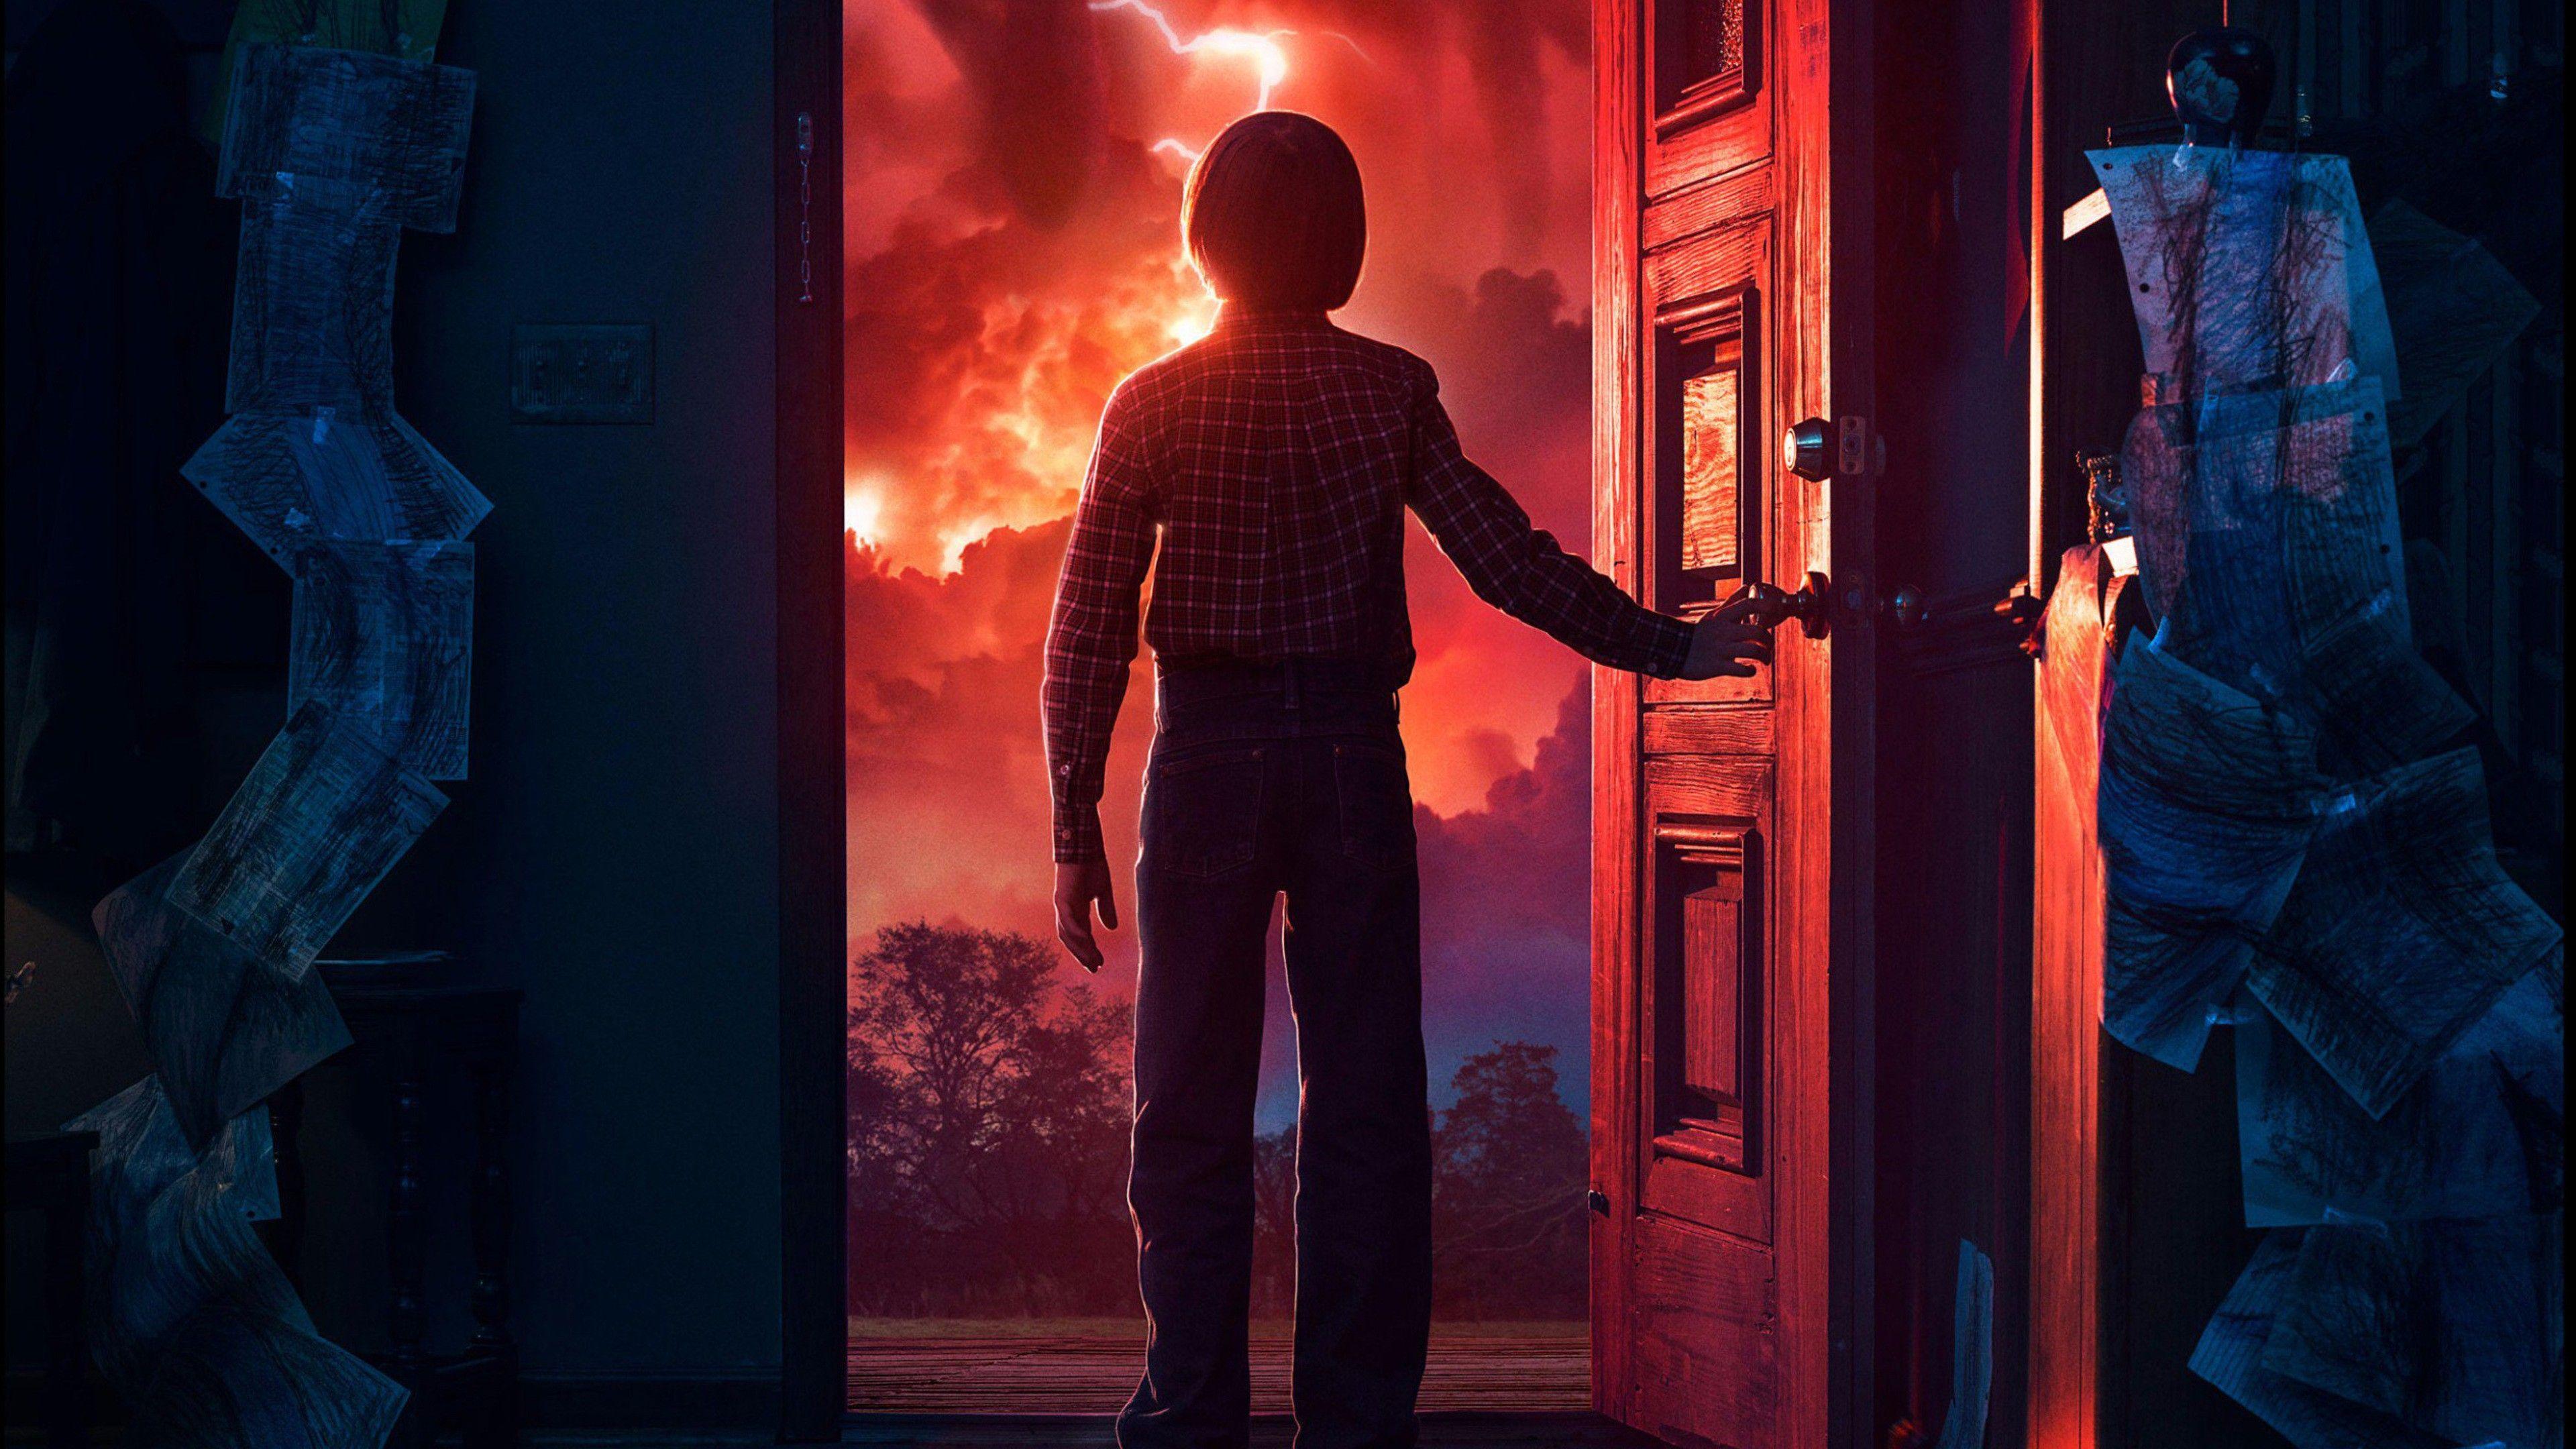 Netflix Goes Retro With Stranger Things Video Game to Promote Season 2   Variety